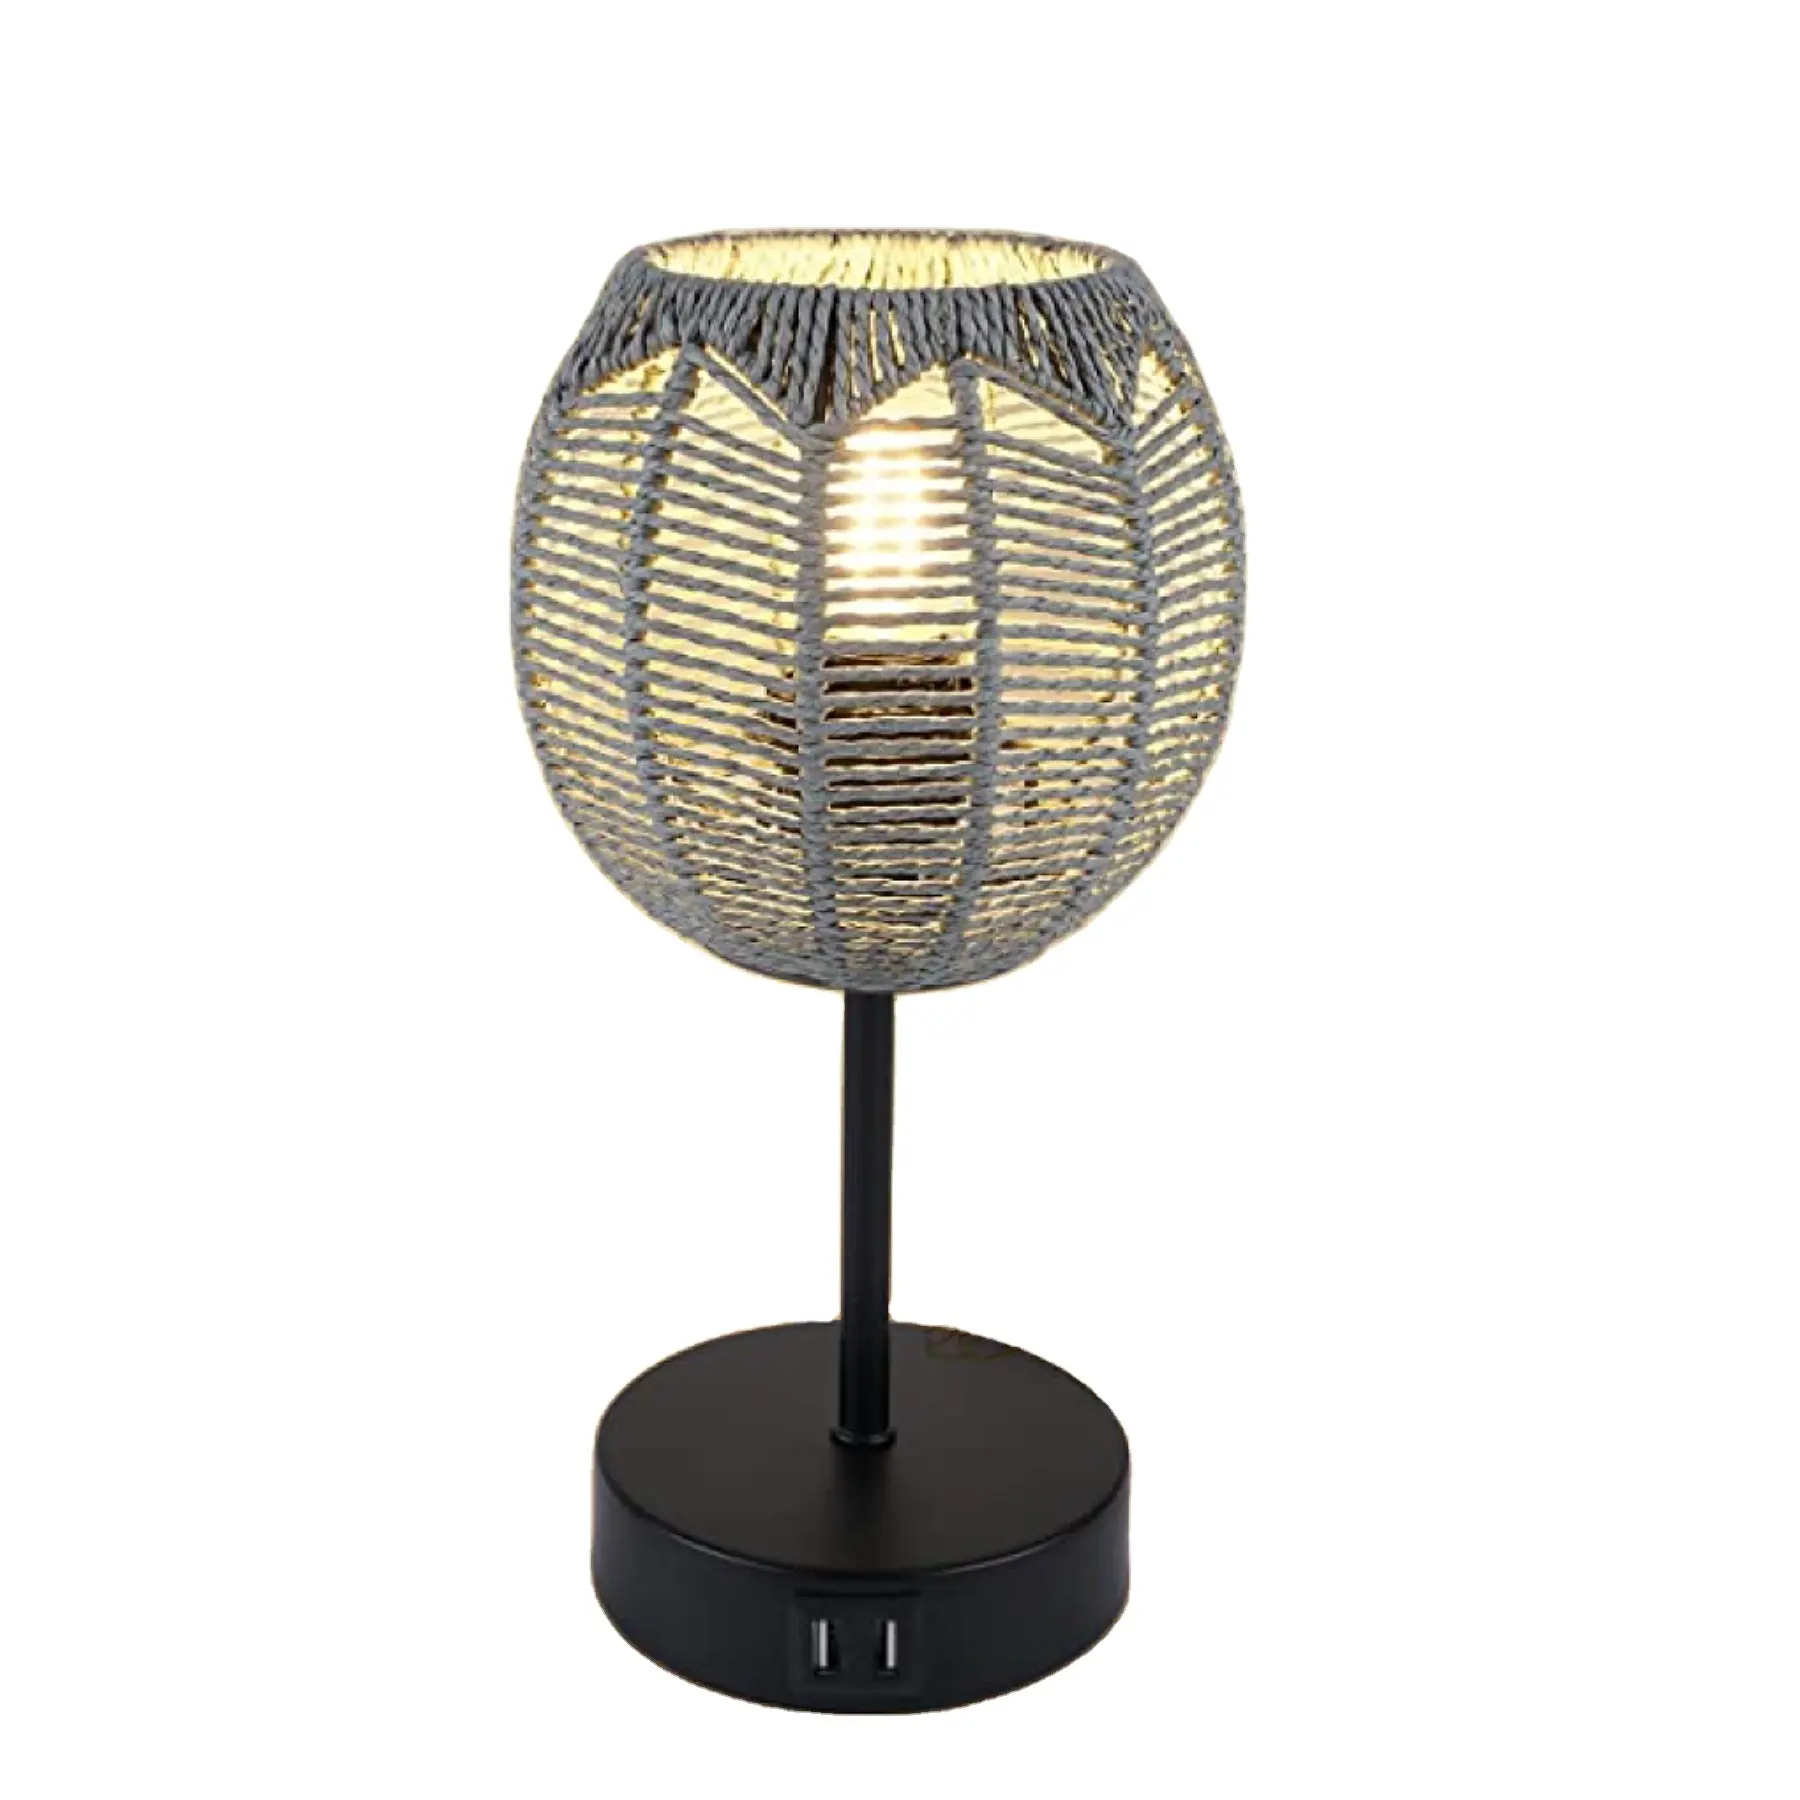 Rattan Boho Vintage Touch Control Bedside Nightstand Table Lamp With USB Ports and Woven Shade For Home